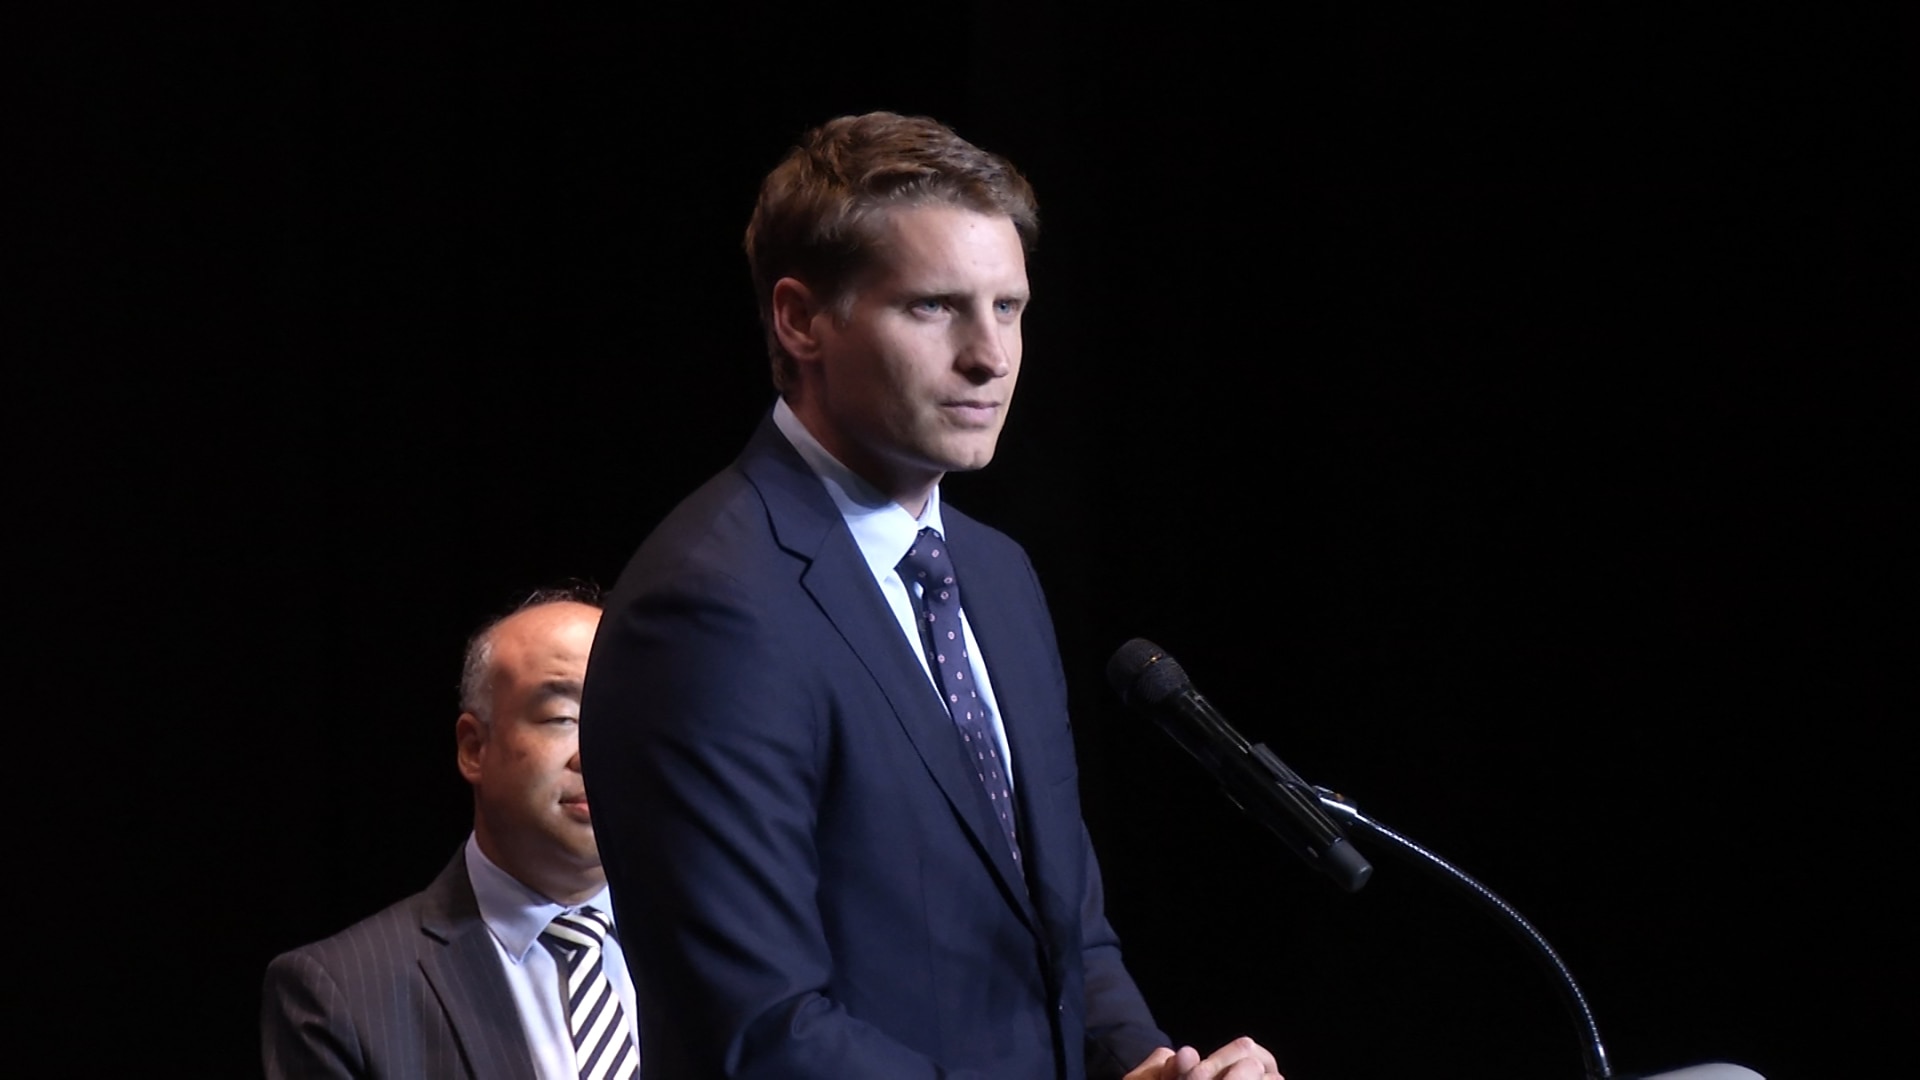 Member for Canning, Andrew Hastie, addresses the forum.